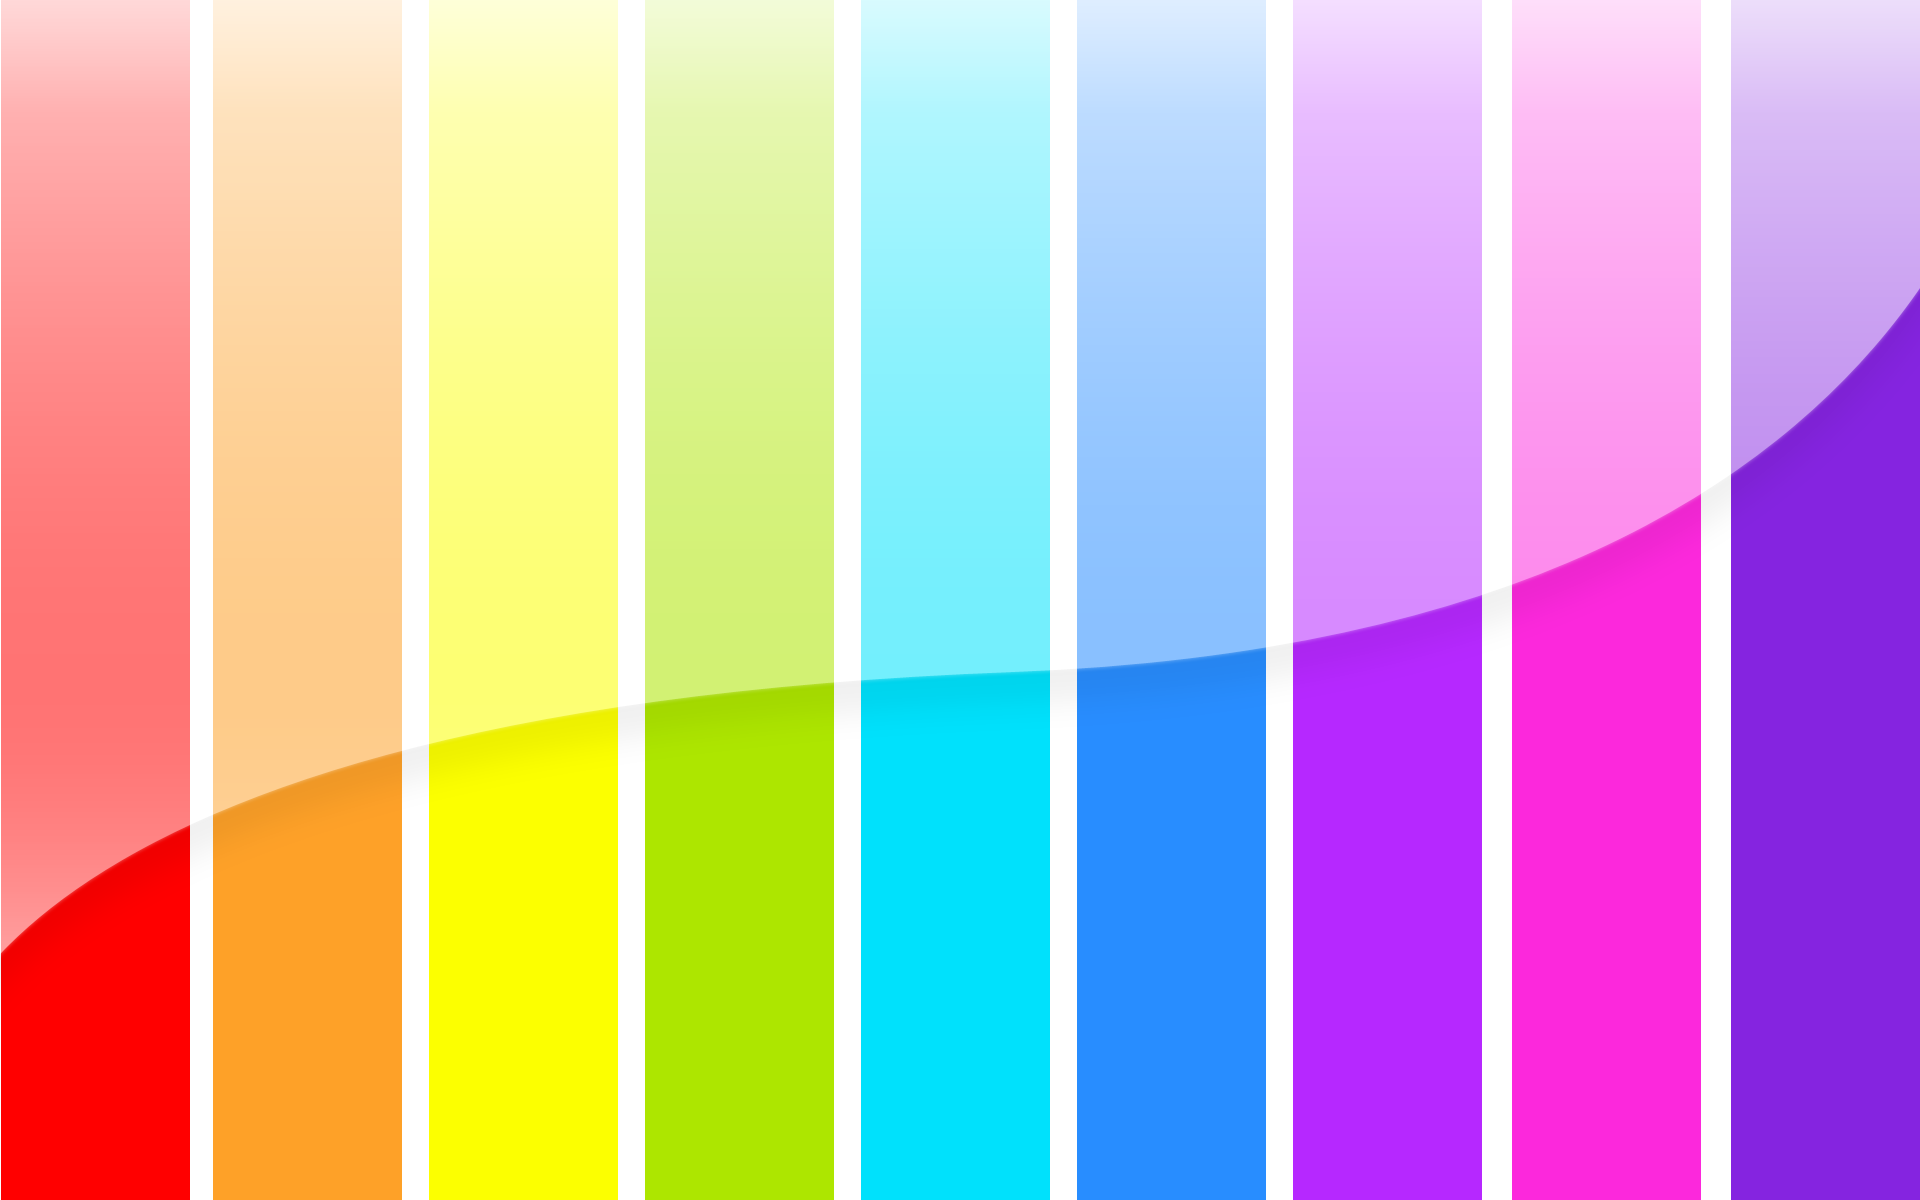 Colors Wallpapers